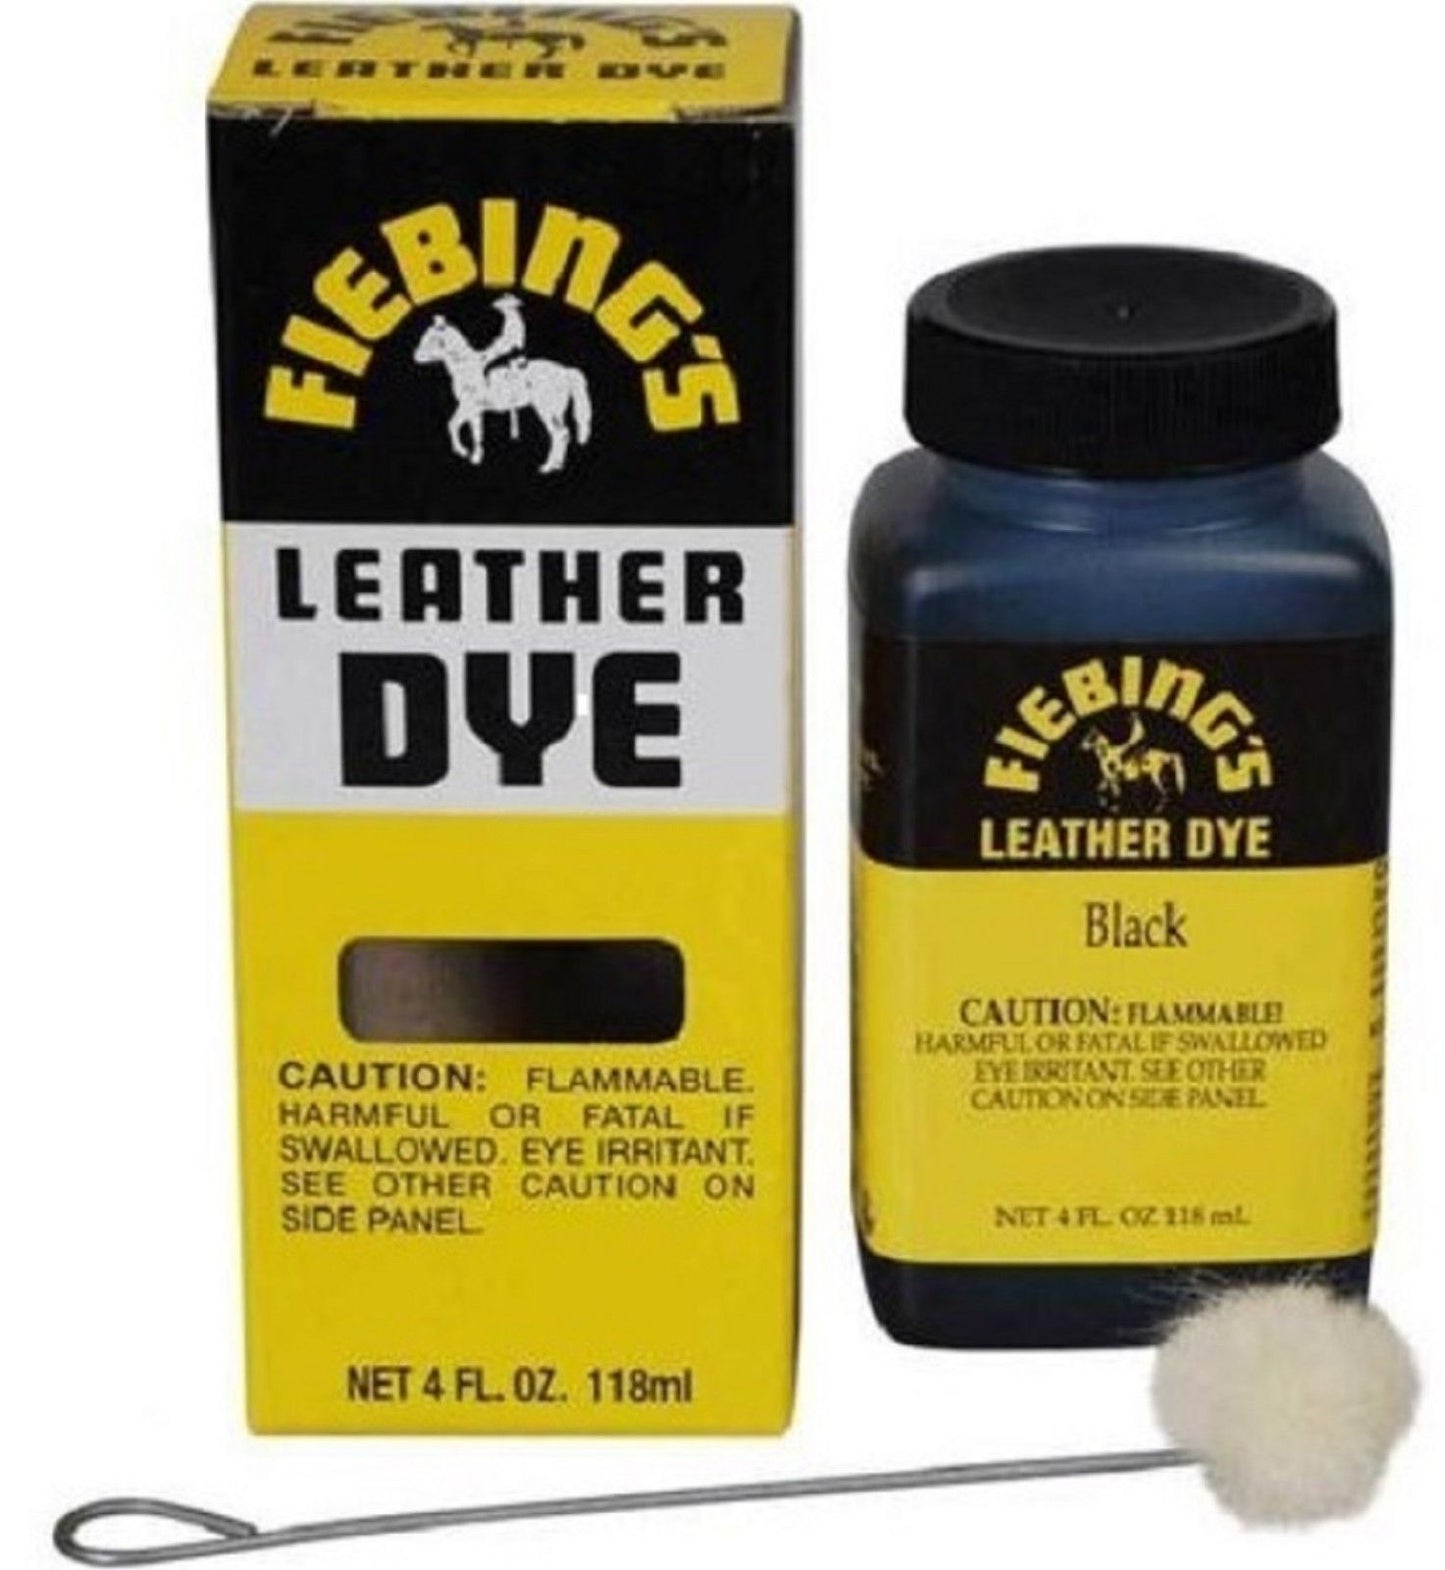 Fiebing's 4 oz Leather Dye & Applicator -  Boots, Shoes, Bags Anything Leather